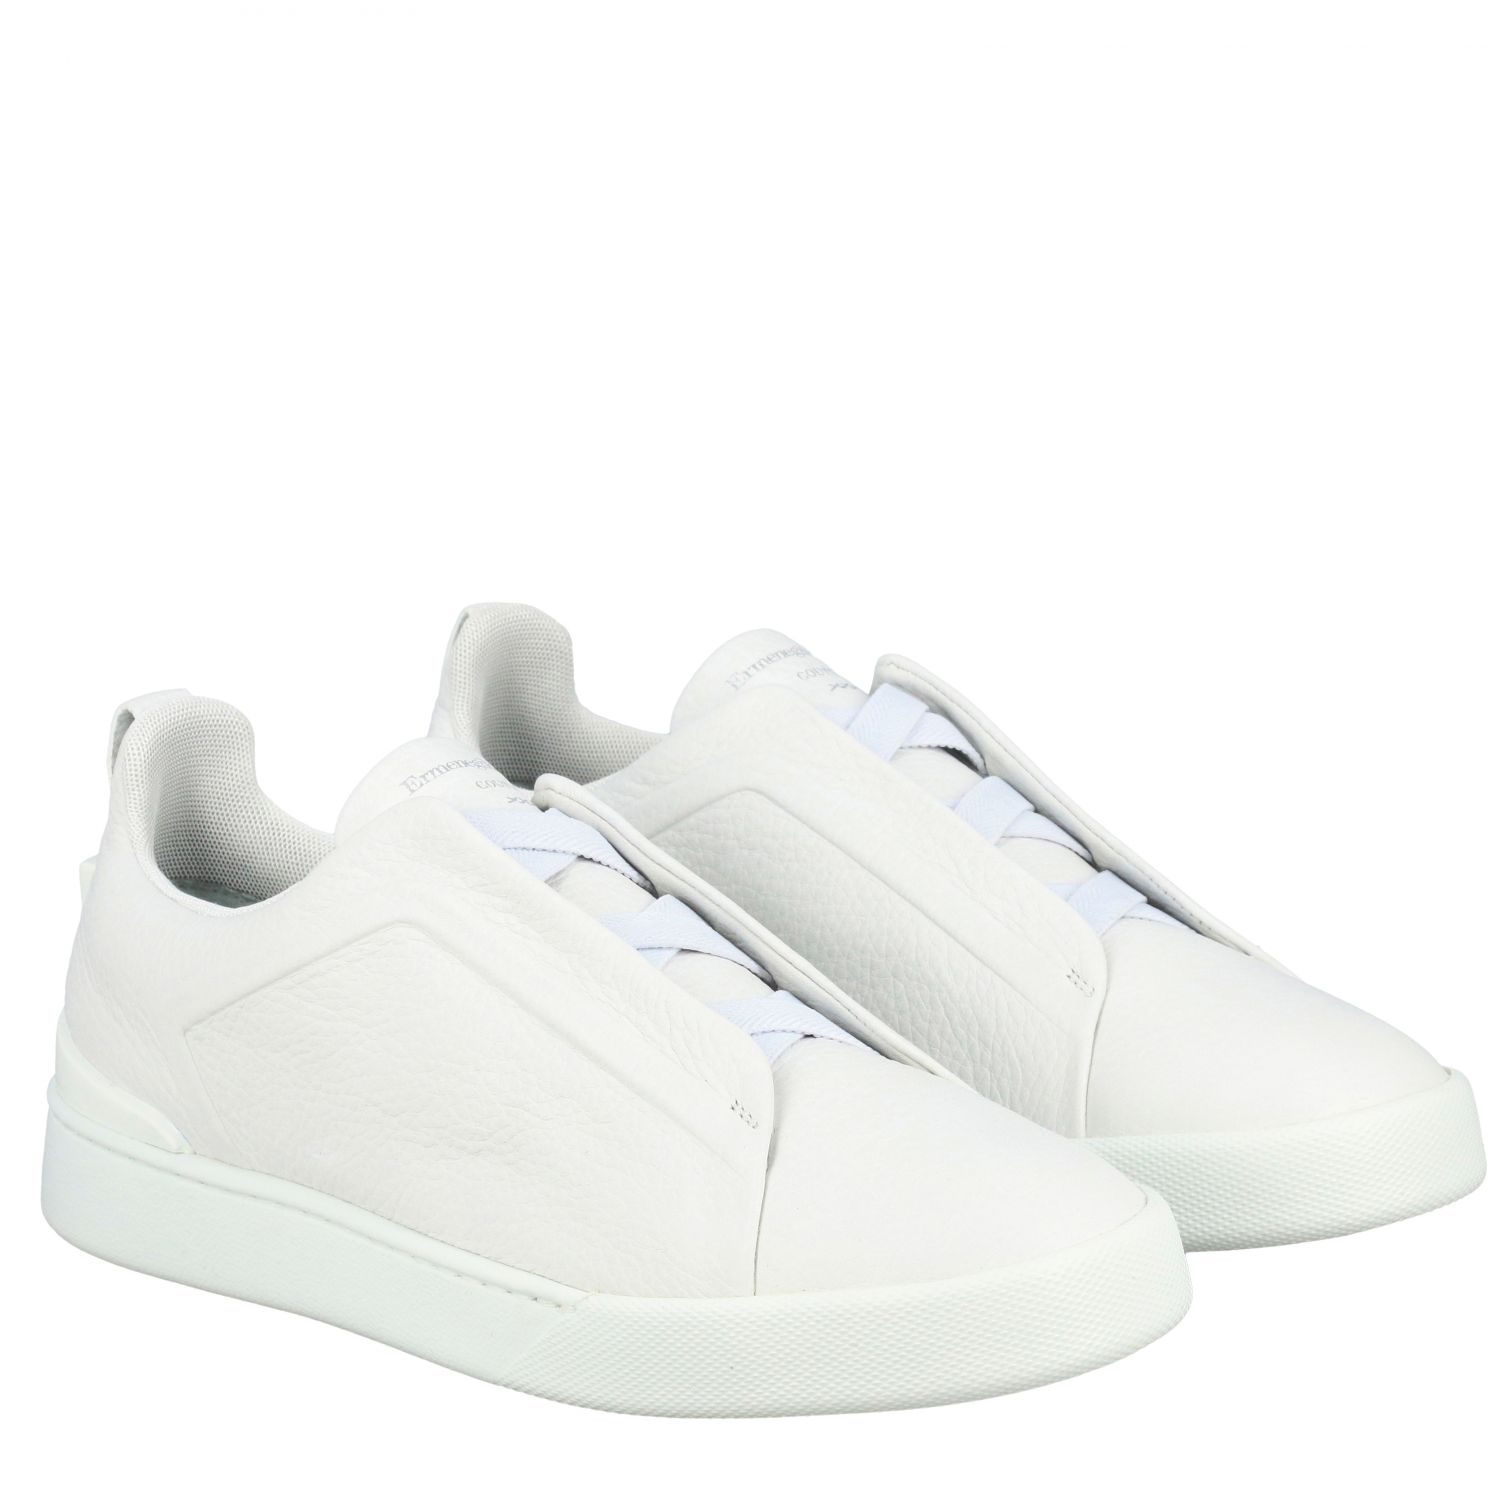 Z Zegna Outlet: leather sneakers with elastic laces - White | Z Zegna ...